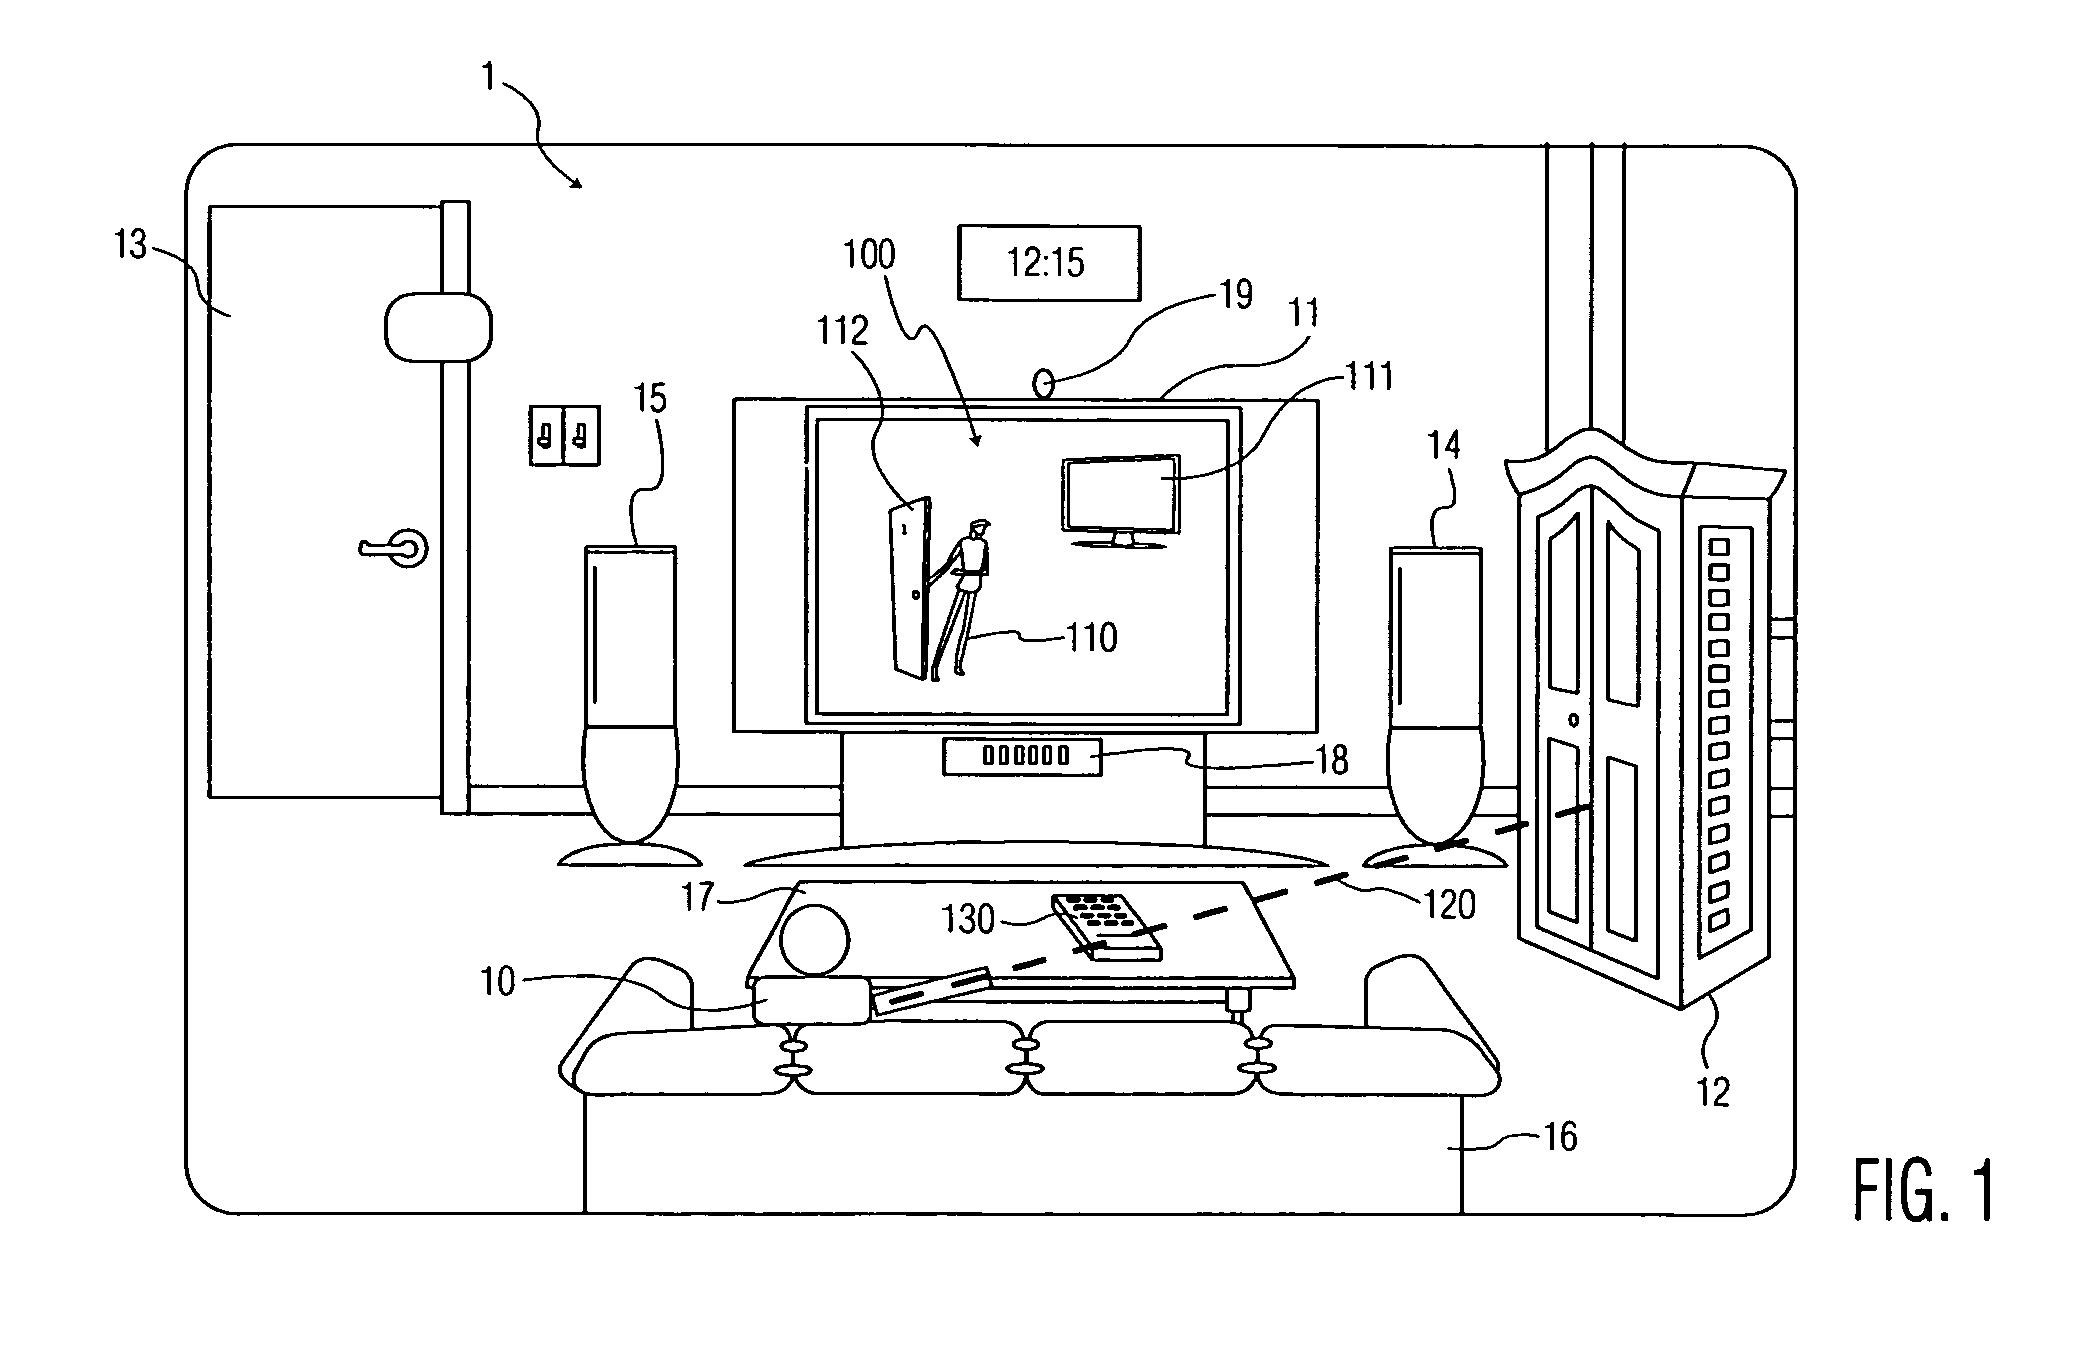 Method for selection of an object in a virtual environment